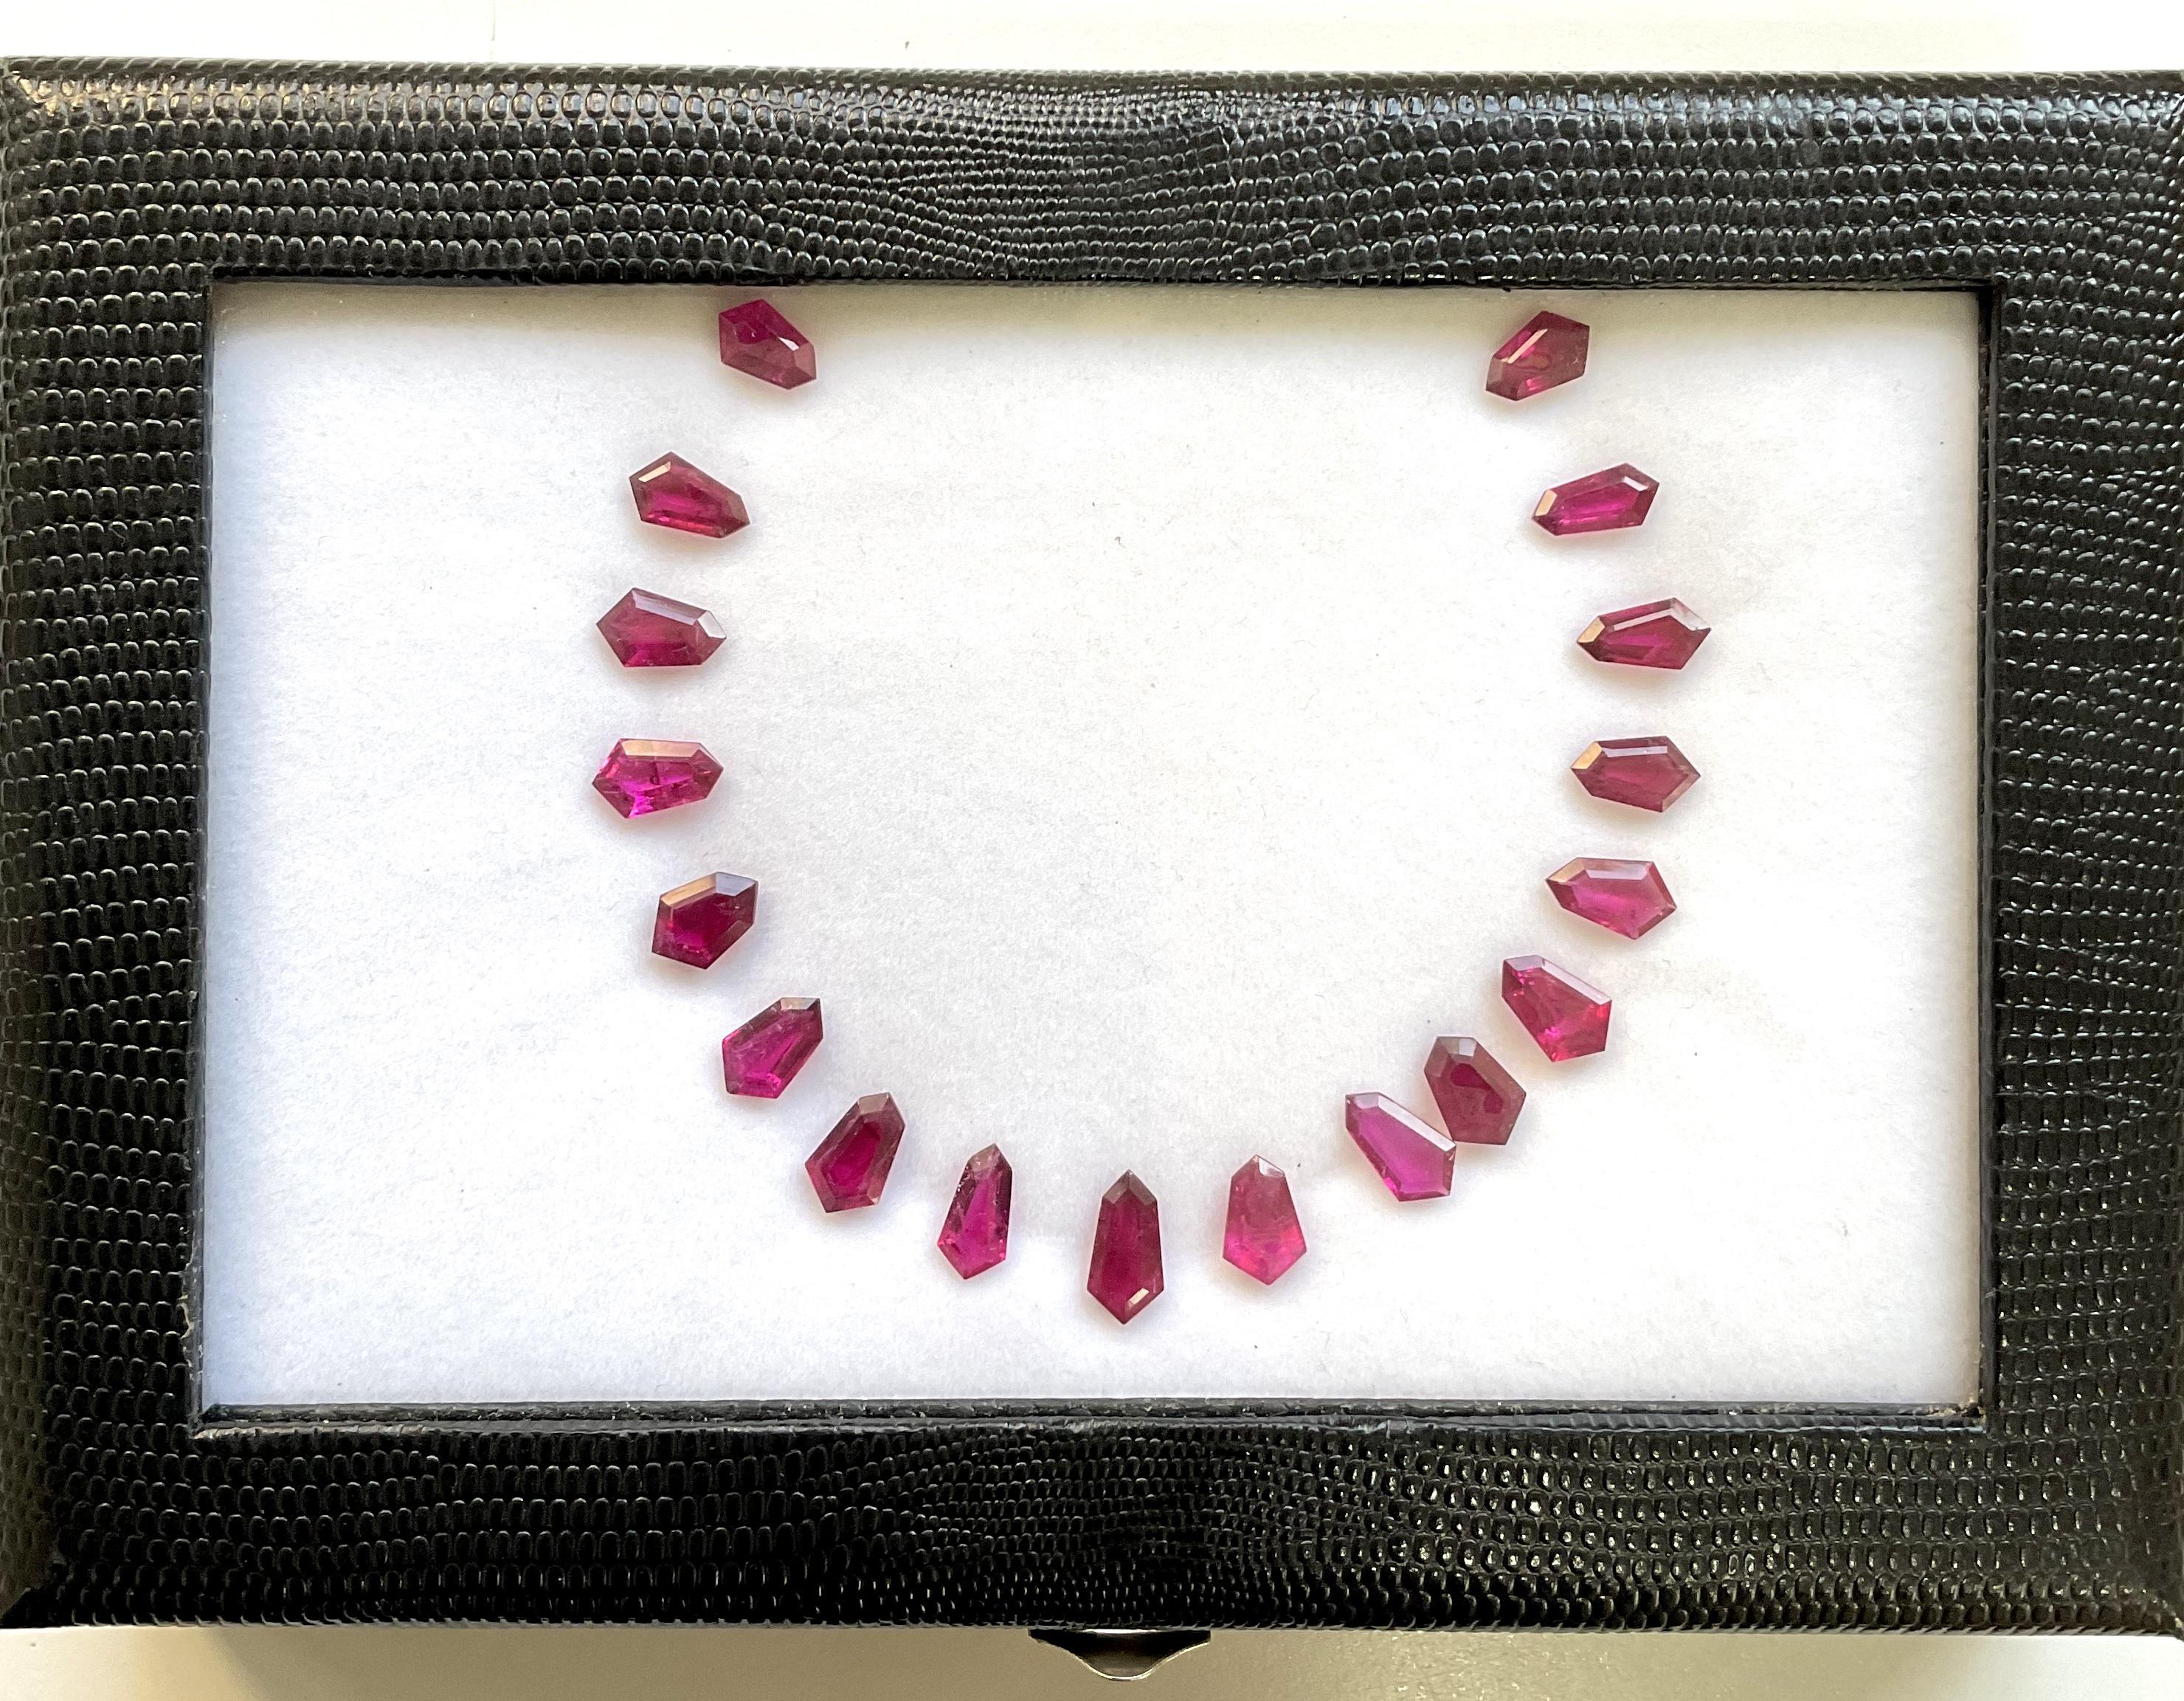 Rubellite Layout Top Quality Tourmaline Fancy Pair Cutstone Natural
Gemstone - Rubellite Tourmaline
Weight - 27.44 Ct
Size - 7.9x12.8 To 5.7x8.4 MM
Pieces - 18

